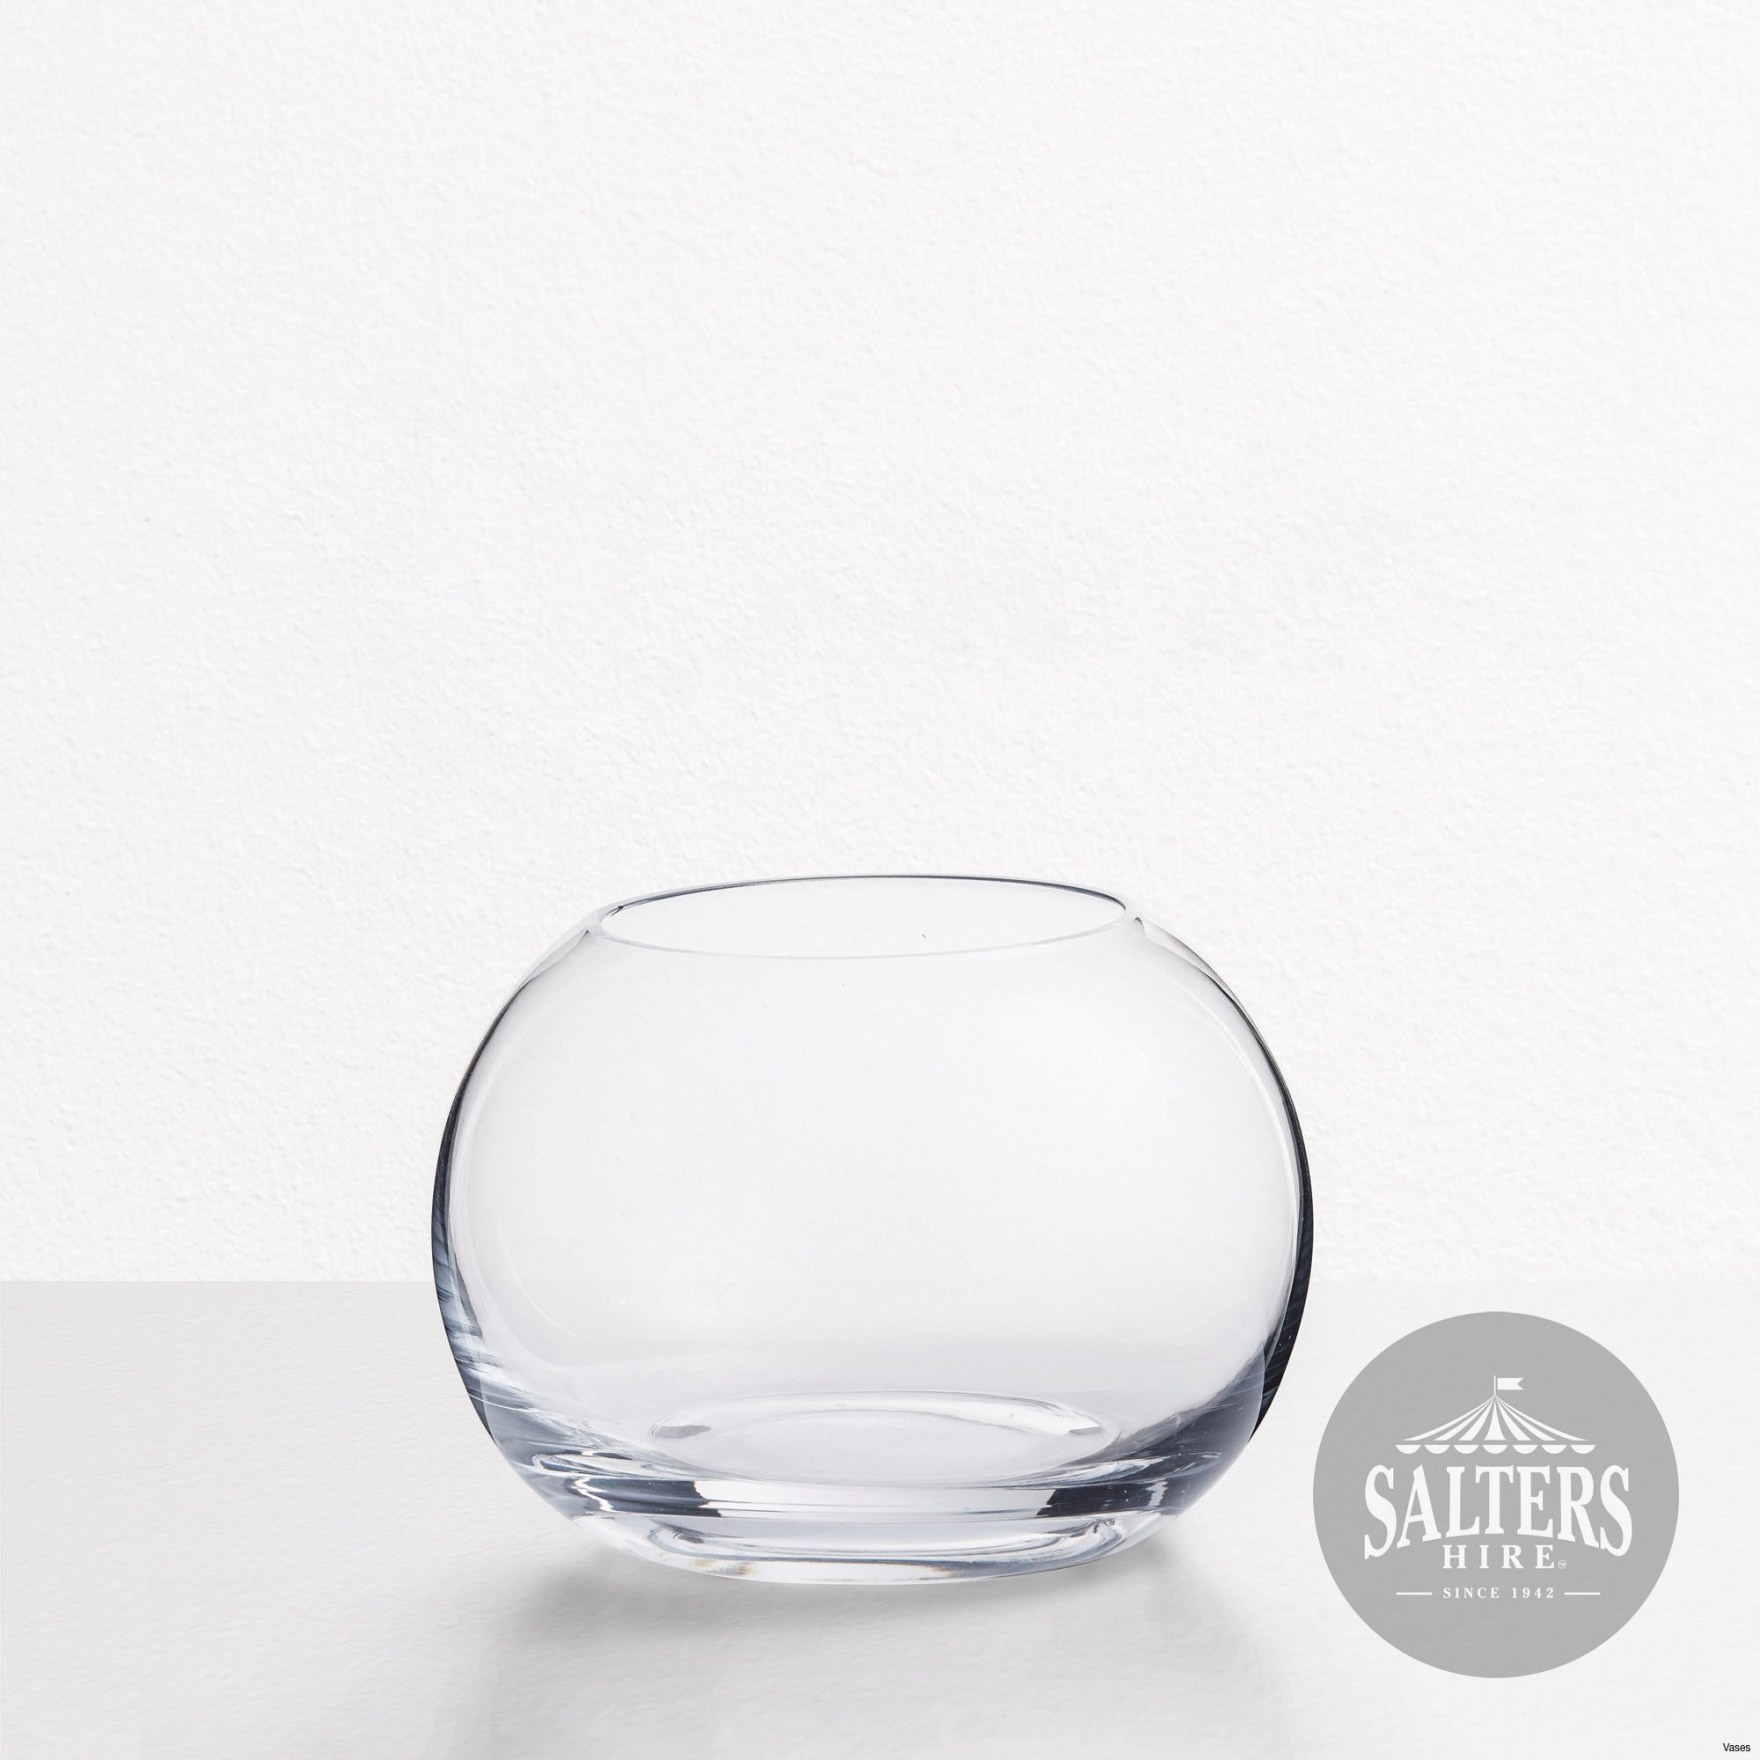 silver vases bulk of fish bowls in bulk images vases bubble ball discount 15 vase round with fish bowls in bulk photograph cool small fish bowls 50 imgf h vases small fish bowl